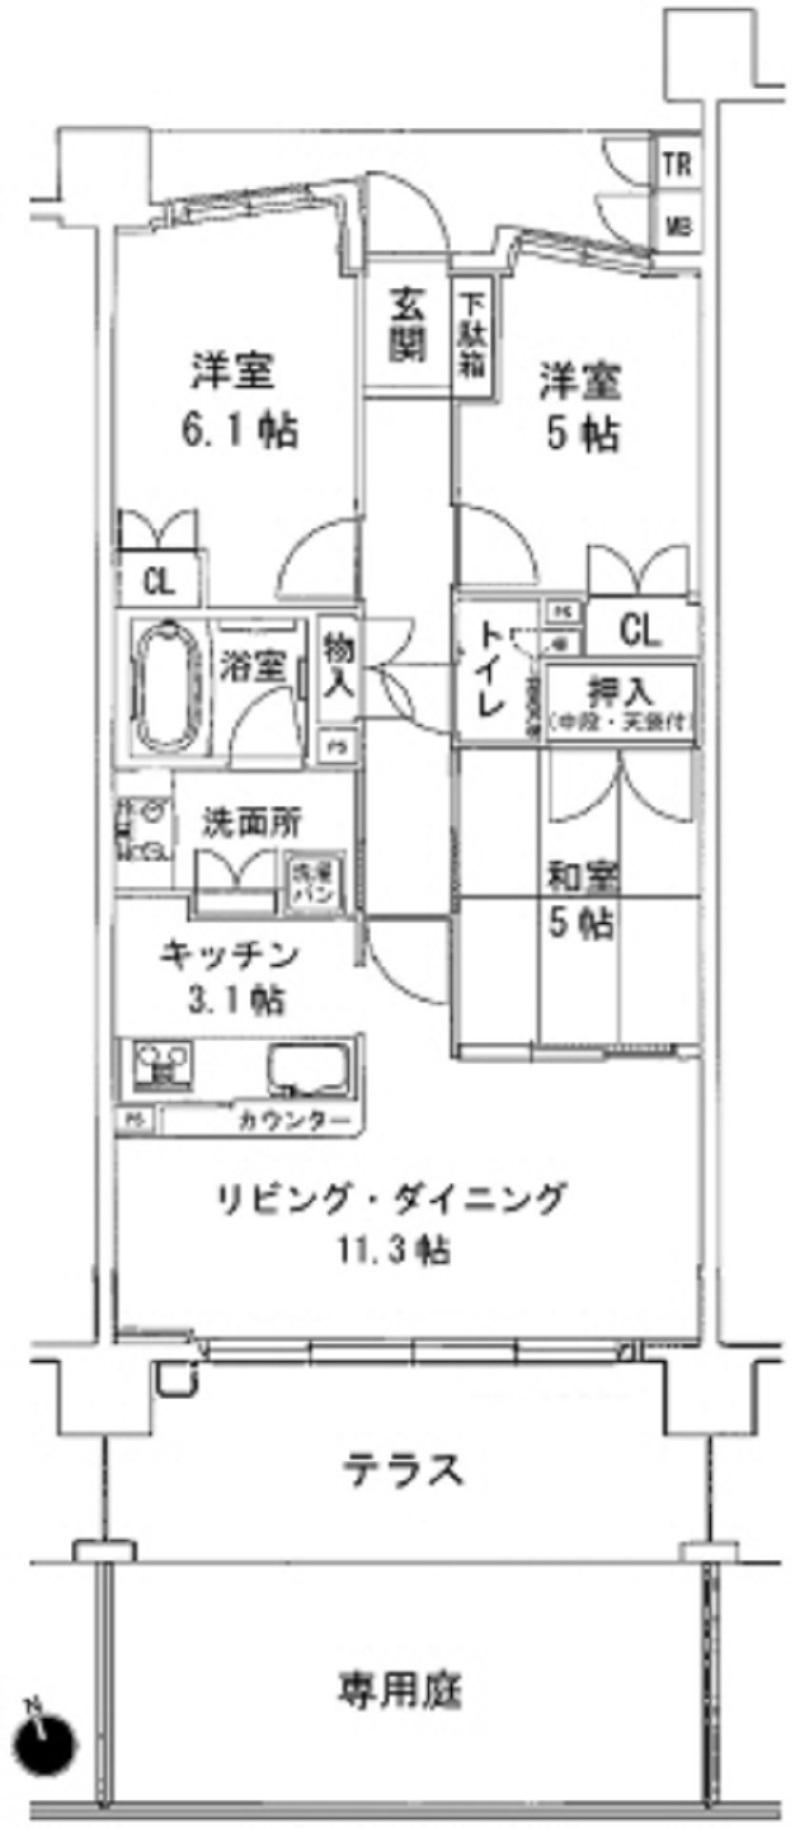 Floor plan. 3LDK, Price 17,900,000 yen, Occupied area 69.71 sq m south-facing 3LDK It will be able to plant your favorite plant in the private garden.